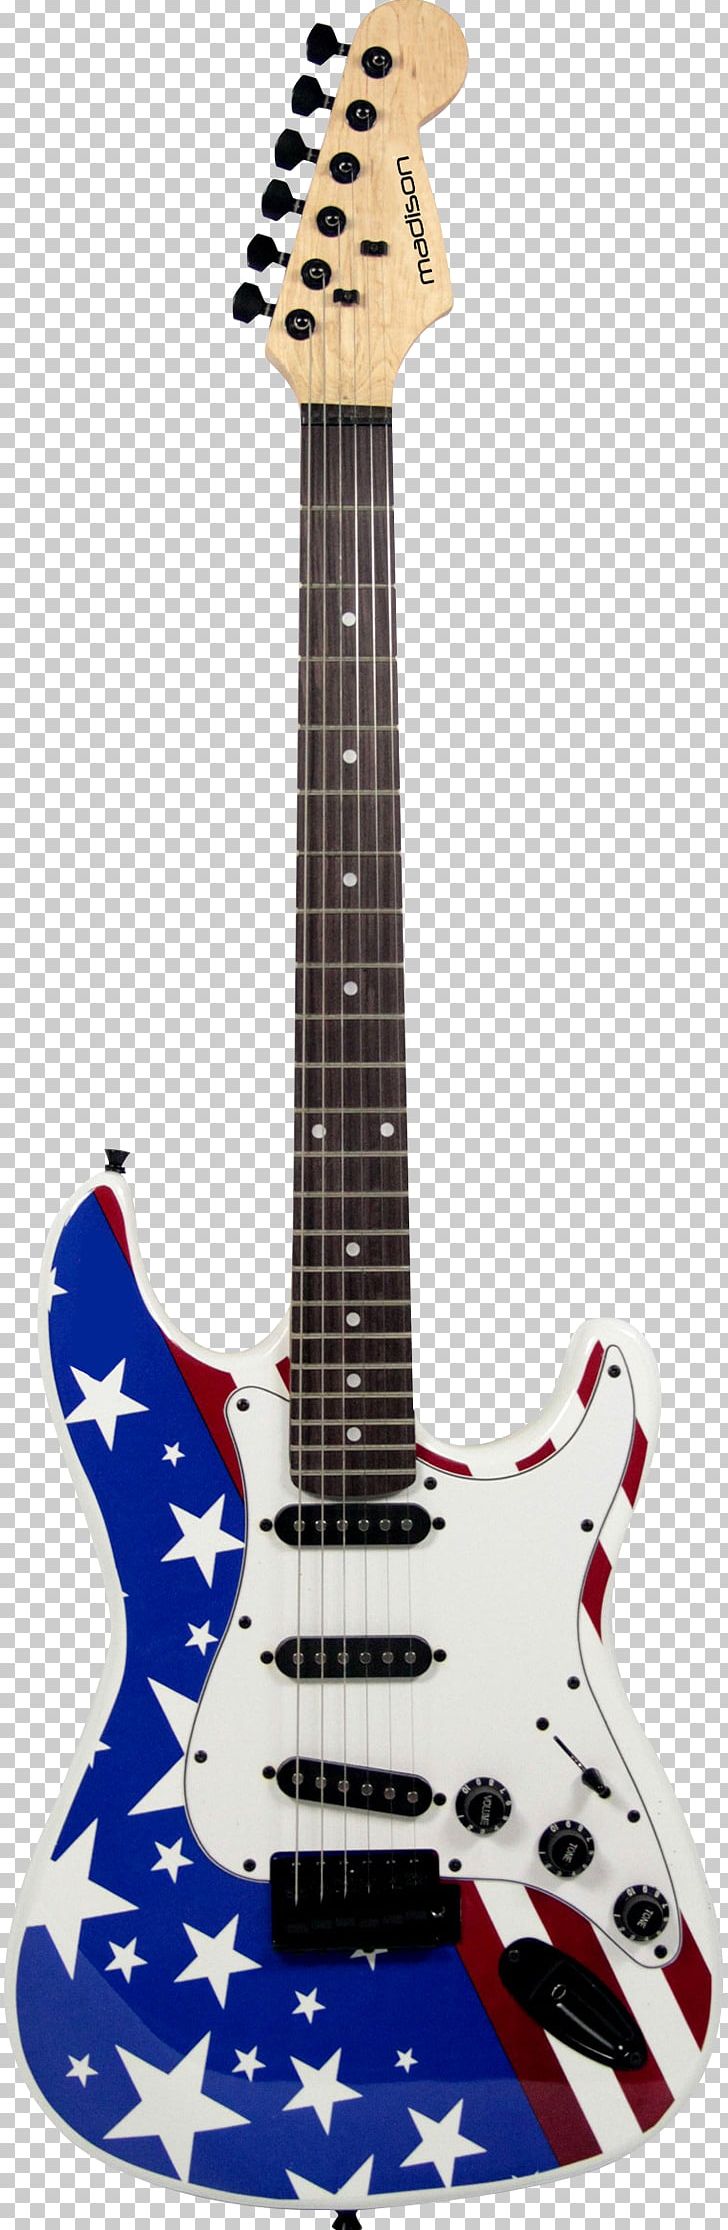 Guitar Amplifier Fender Stratocaster Electric Guitar Fender Musical Instruments Corporation PNG, Clipart, Acoustic Electric Guitar, Bass Guitar, Electricity, Guitar Accessory, Guitar Amplifier Free PNG Download